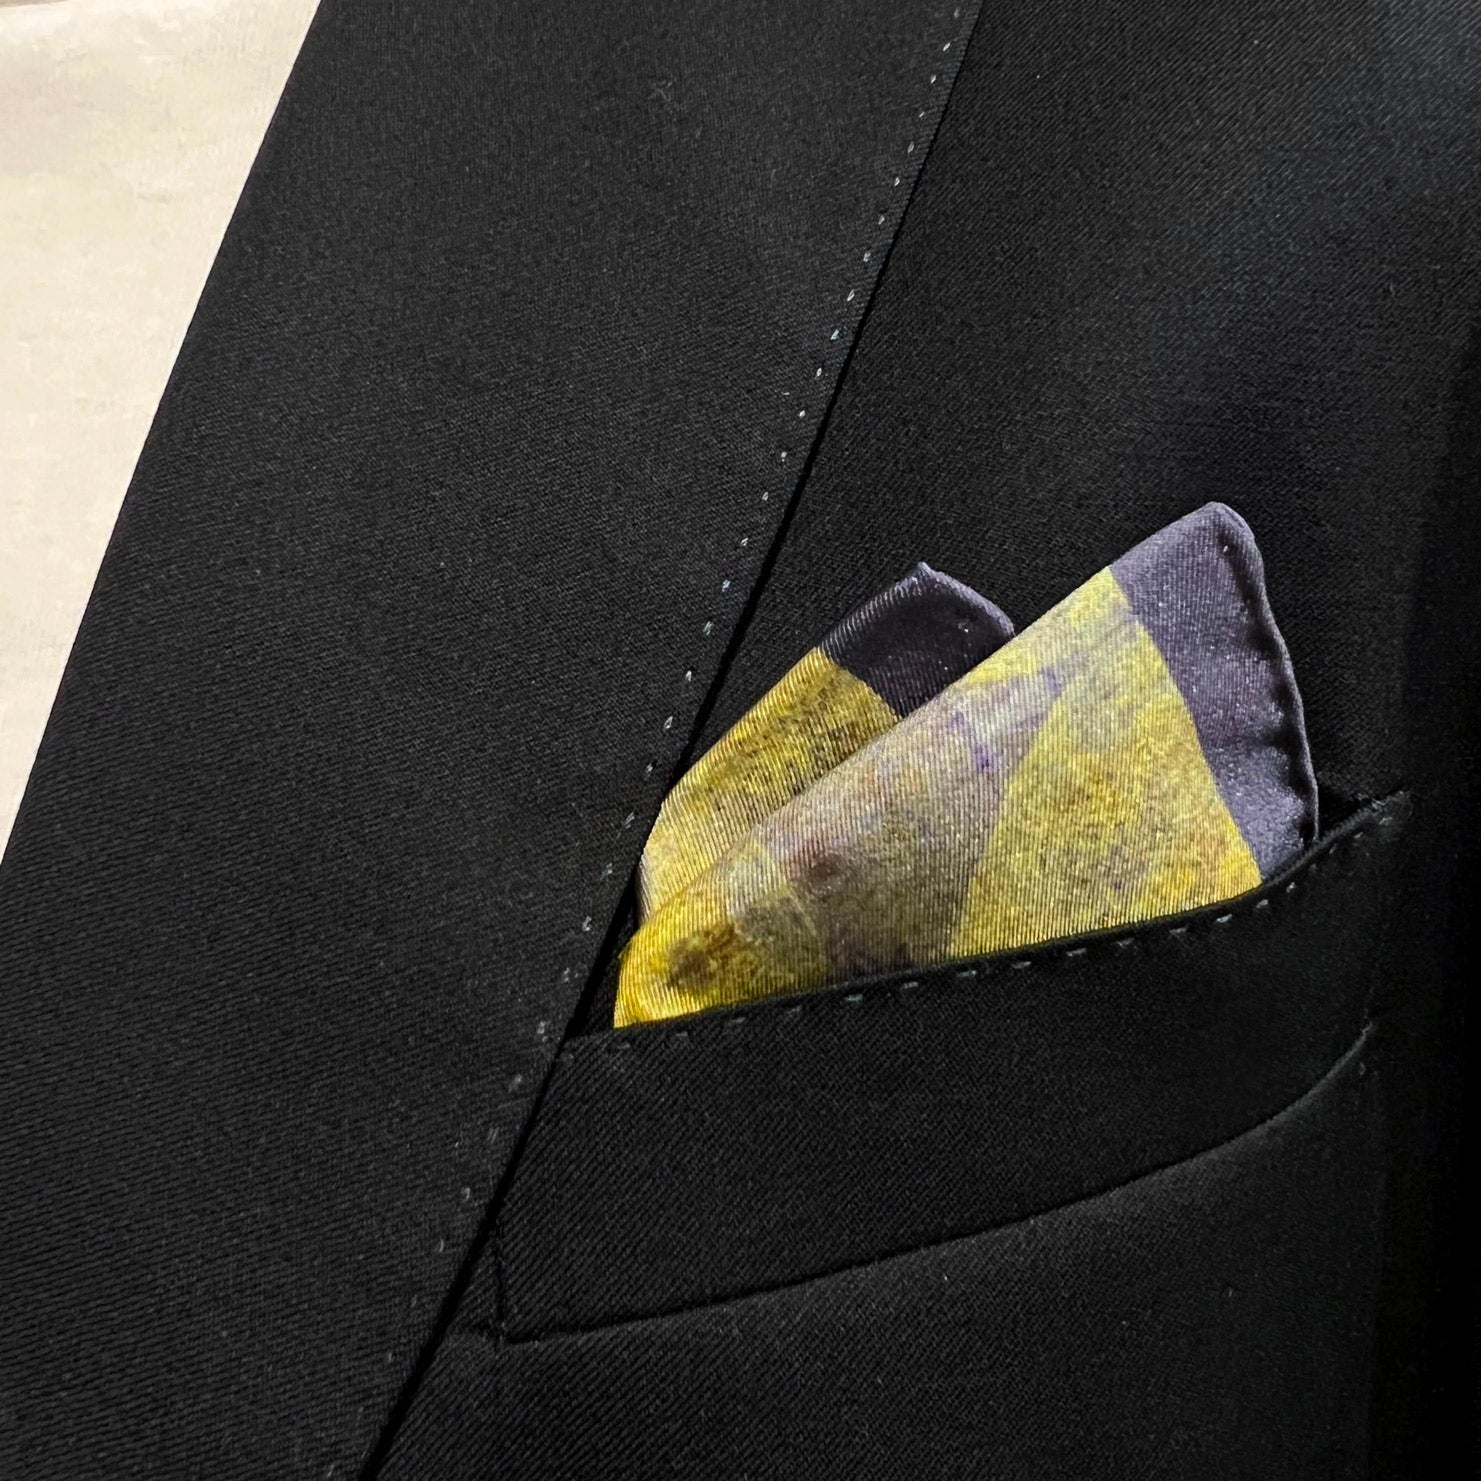 Silk square handkerchief with yellow and purple textured effect. Placed in a jacket breast pocket.